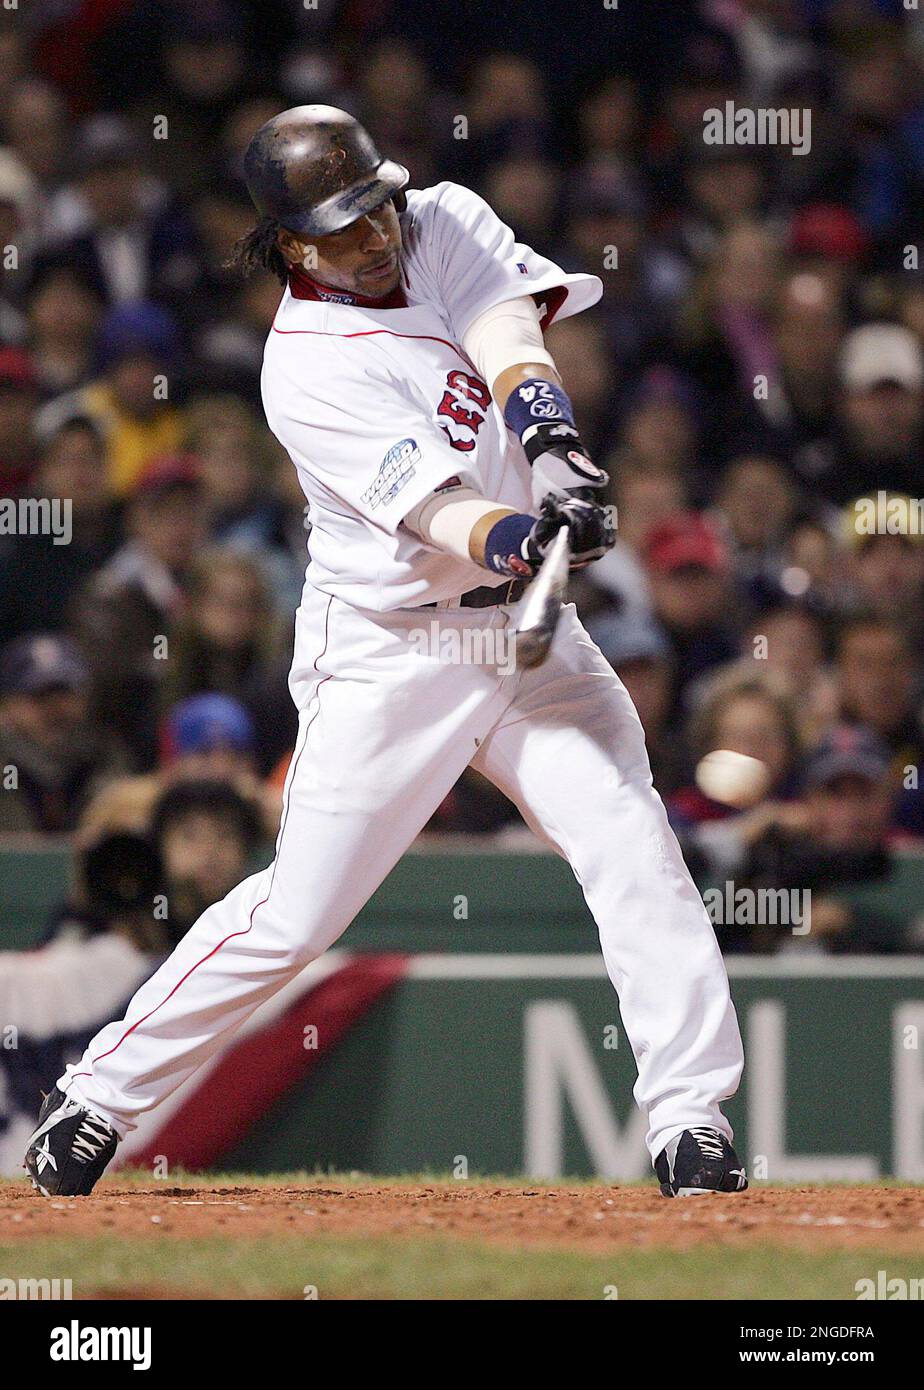 Boston Red Sox's Manny Ramirez hits into a fielder's choice in the third inning against the St. Louis Cardinals in Game 1 of the World Series Saturday, Oct. 23, 2004 in Boston. The Sox won 11-9. Brilliant with the bat, bumbling in the field, the Red Sox outfielder was in his usual form for Game 1 of the World Series (news - web sites) on Saturday night when he singled three times and committed two errors (AP Photo/Charles Krupa) Foto Stock